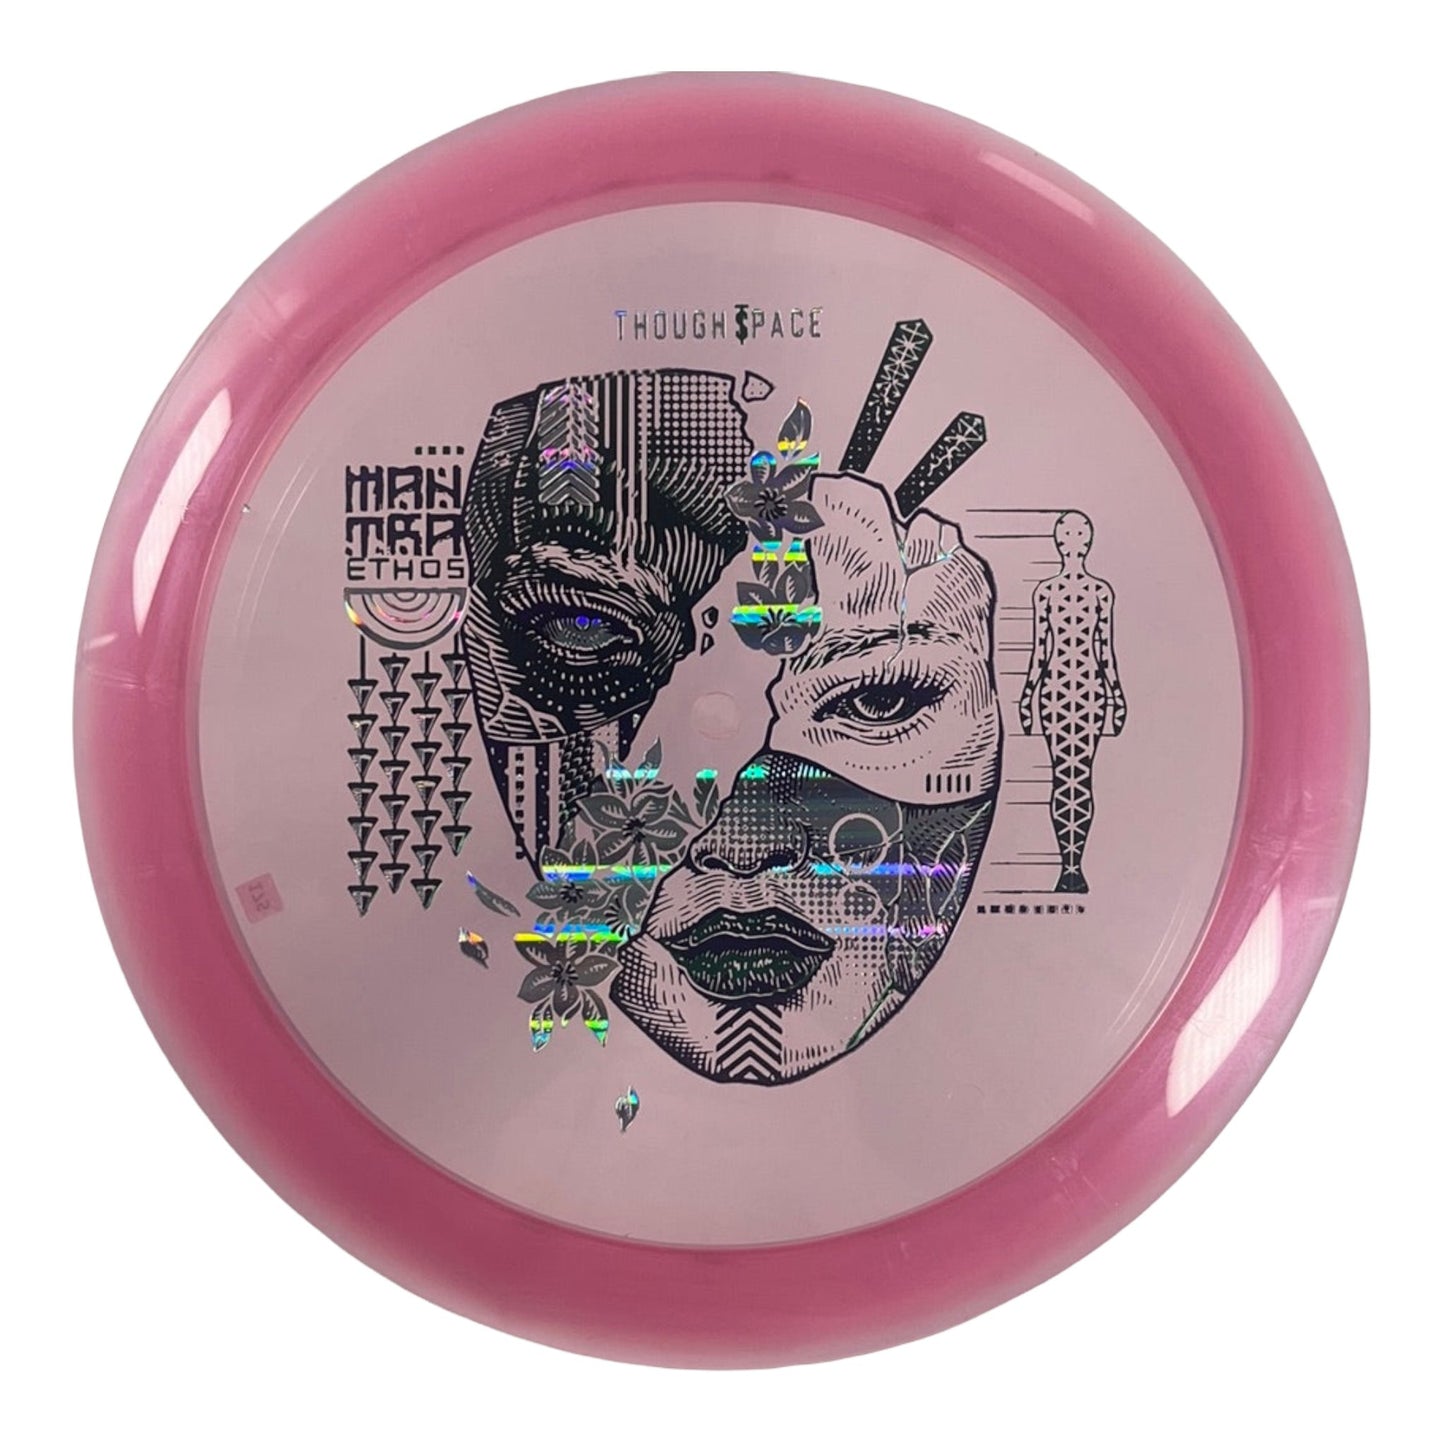 Thought Space Athletics Mantra | Ethos | Pink/Holo 175g Disc Golf